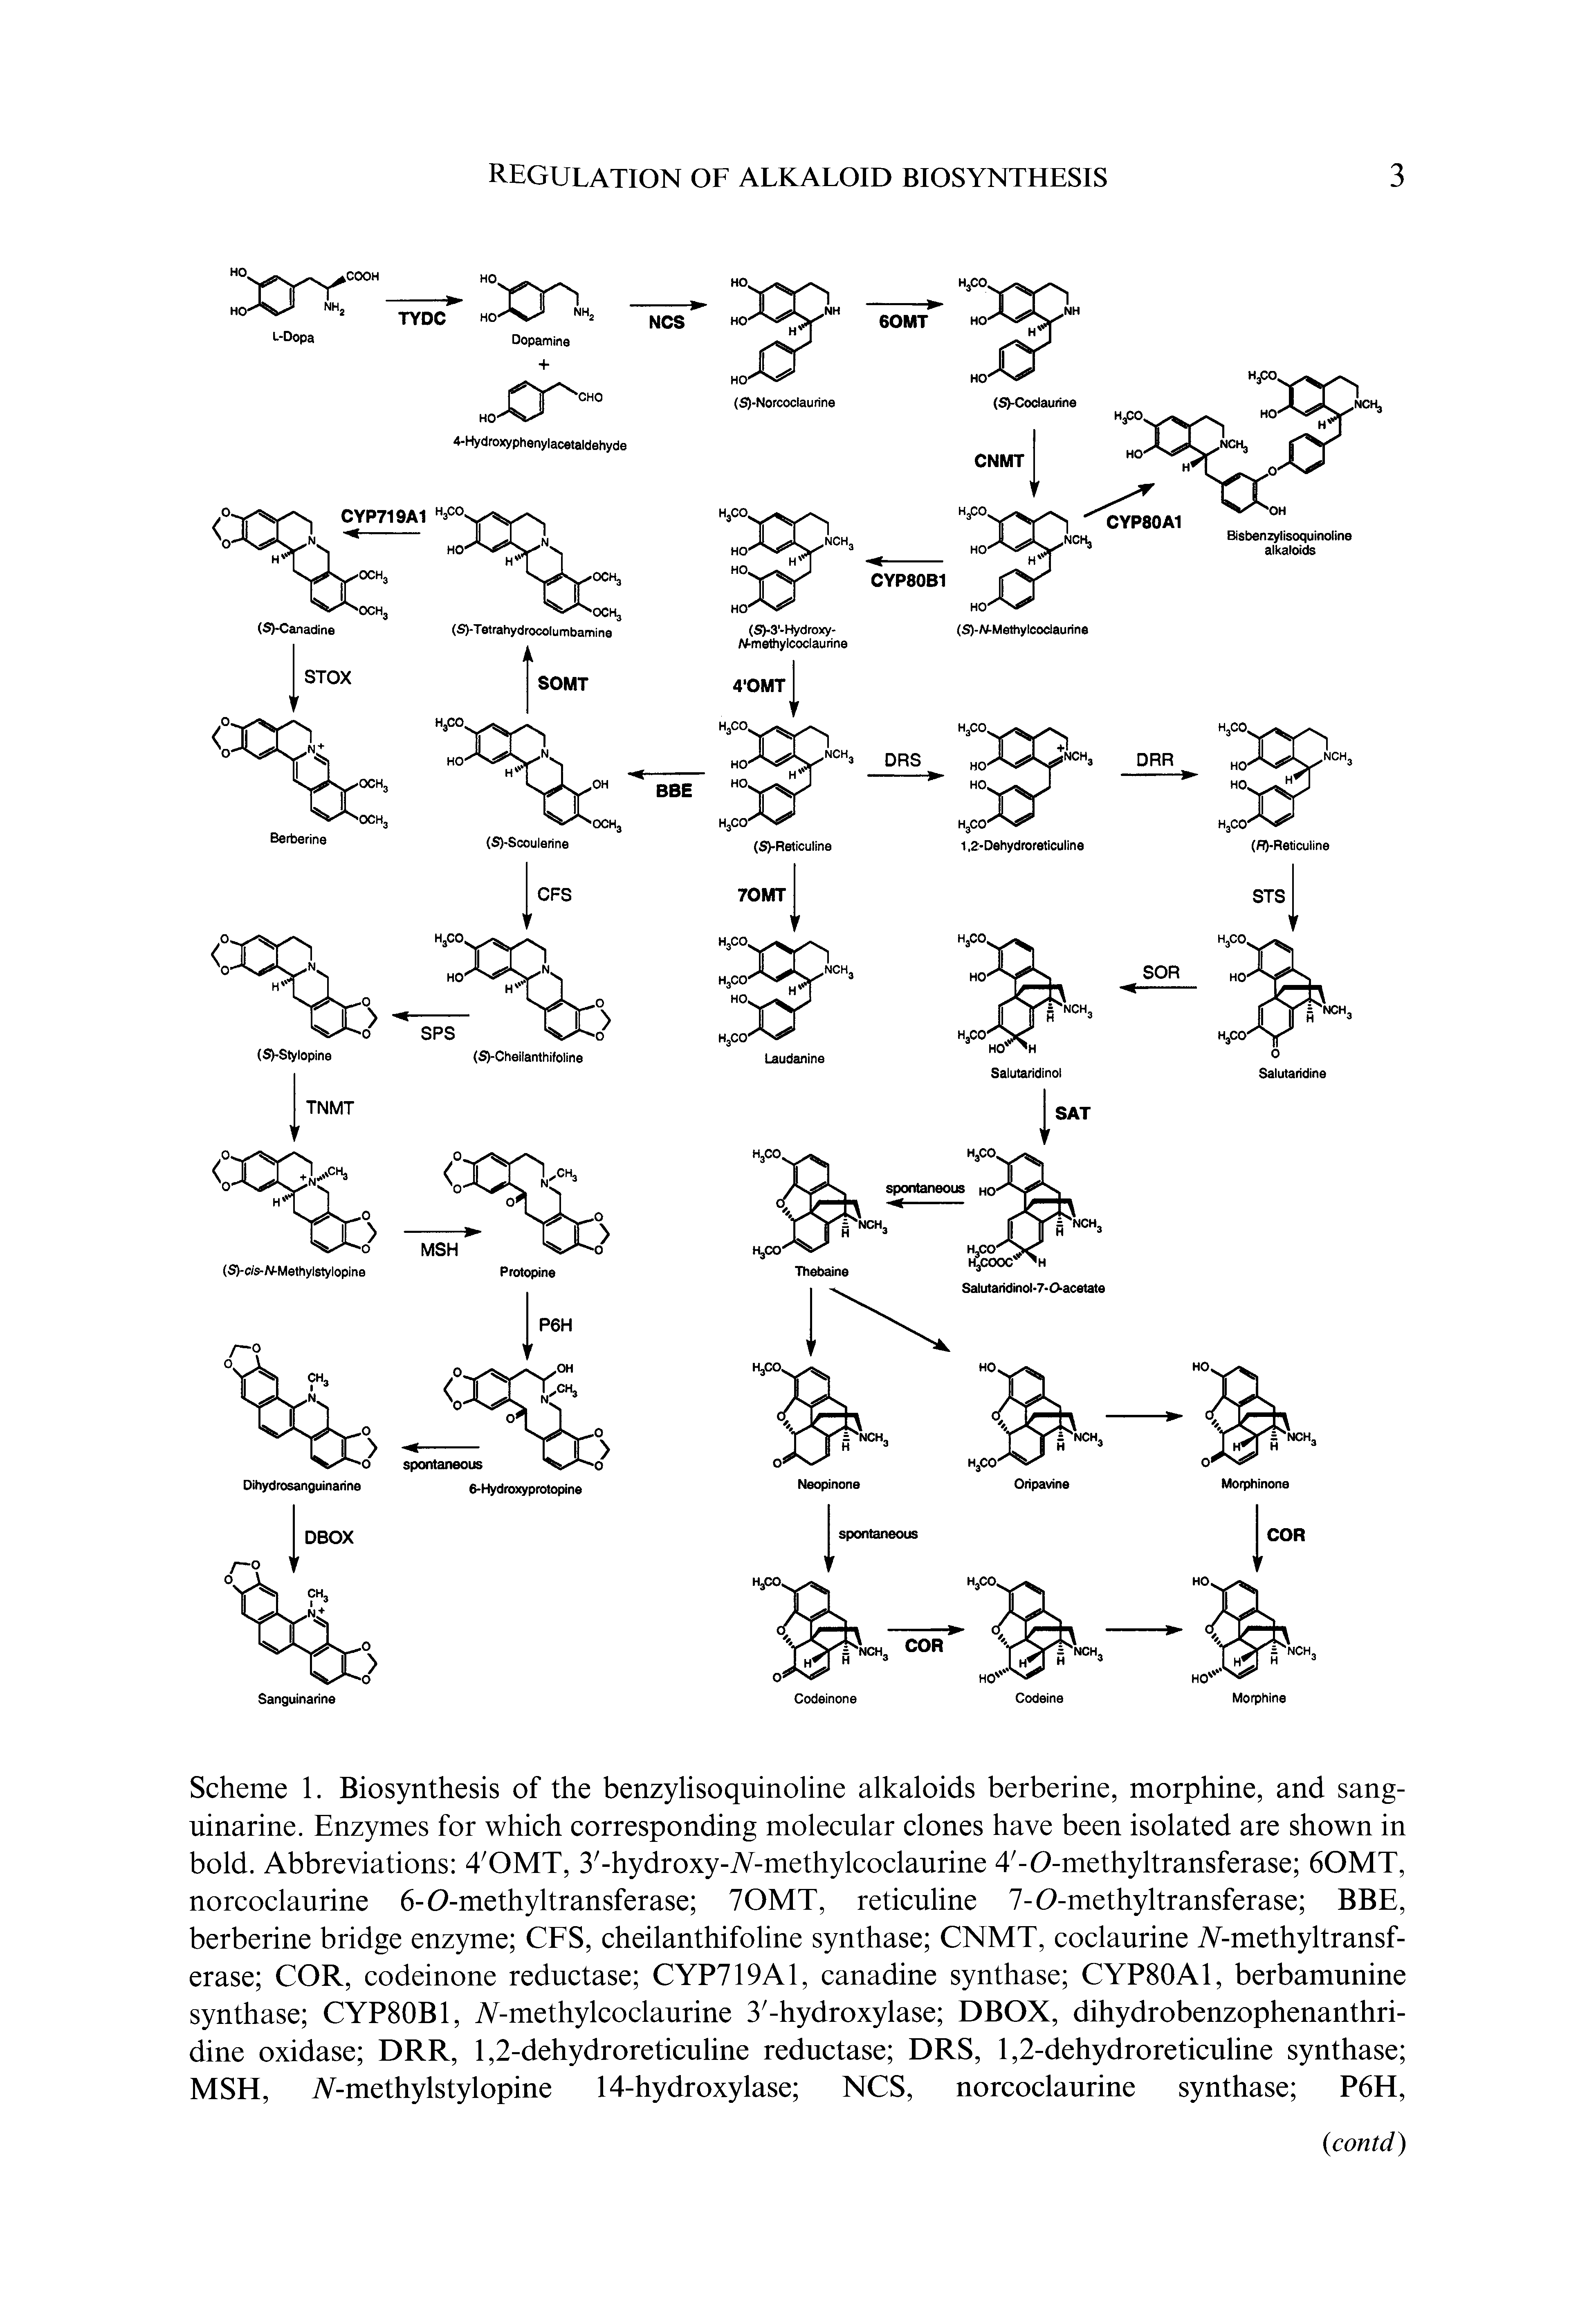 Scheme 1. Biosynthesis of the benzylisoquinoline alkaloids berberine, morphine, and sang-uinarine. Enzymes for which corresponding molecular clones have been isolated are shown in bold. Abbreviations 4 OMT, 3 -hydroxy-A-methylcoclaurine 4 -0-methyltransferase 60MT, norcoclaurine 6-0-methyltransferase 70MT, reticuline 7-0-methyltransferase BBE, berberine bridge enzyme CFS, cheilanthifoline synthase CNMT, coclaurine A-methyltransf-erase COR, codeinone reductase CYP719A1, canadine synthase CYP80A1, berbamunine synthase CYP80B1, A-methylcoclaurine 3 -hydroxylase DBOX, dihydrobenzophenanthri-dine oxidase DRR, 1,2-dehydroreticuline reductase DRS, 1,2-dehydro reticuline synthase MSH, A-methylstylopine 14-hydroxylase NCS, norcoclaurine synthase P6H,...